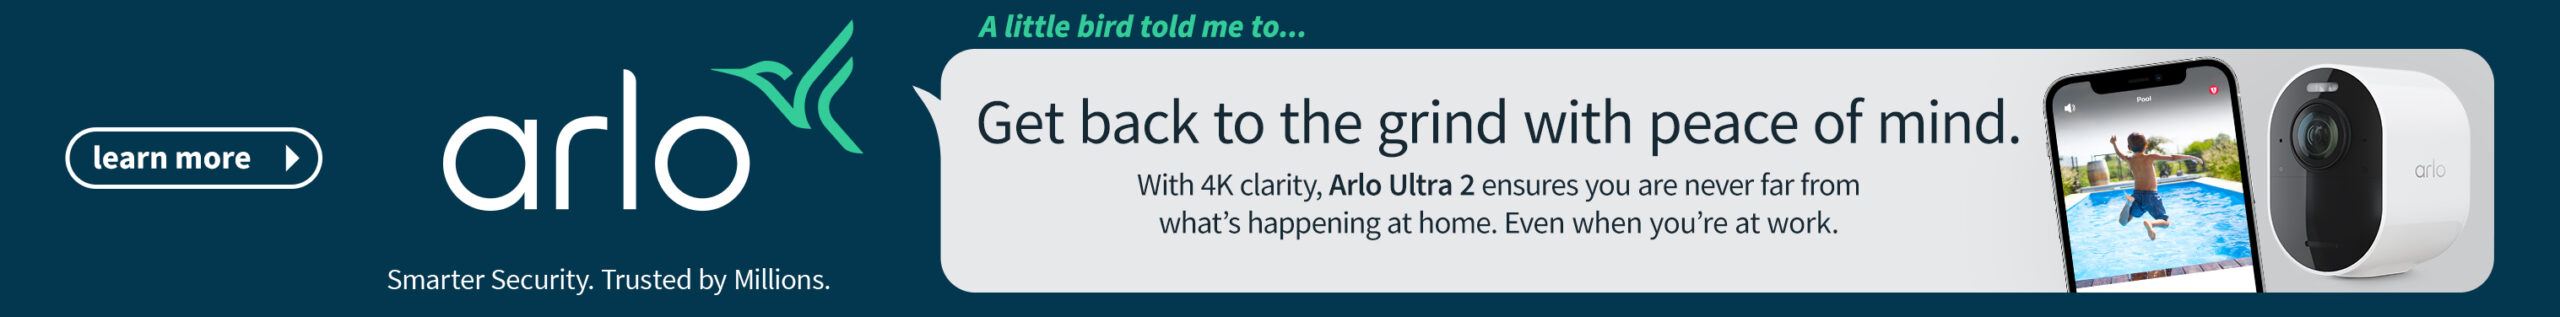 ARL0508 Arlo Ultra 2 NY Banner 728x90px 300dpi V1 scaled Android TV Leak Reveals Stadia Support, ‘Hero Device’ Coming